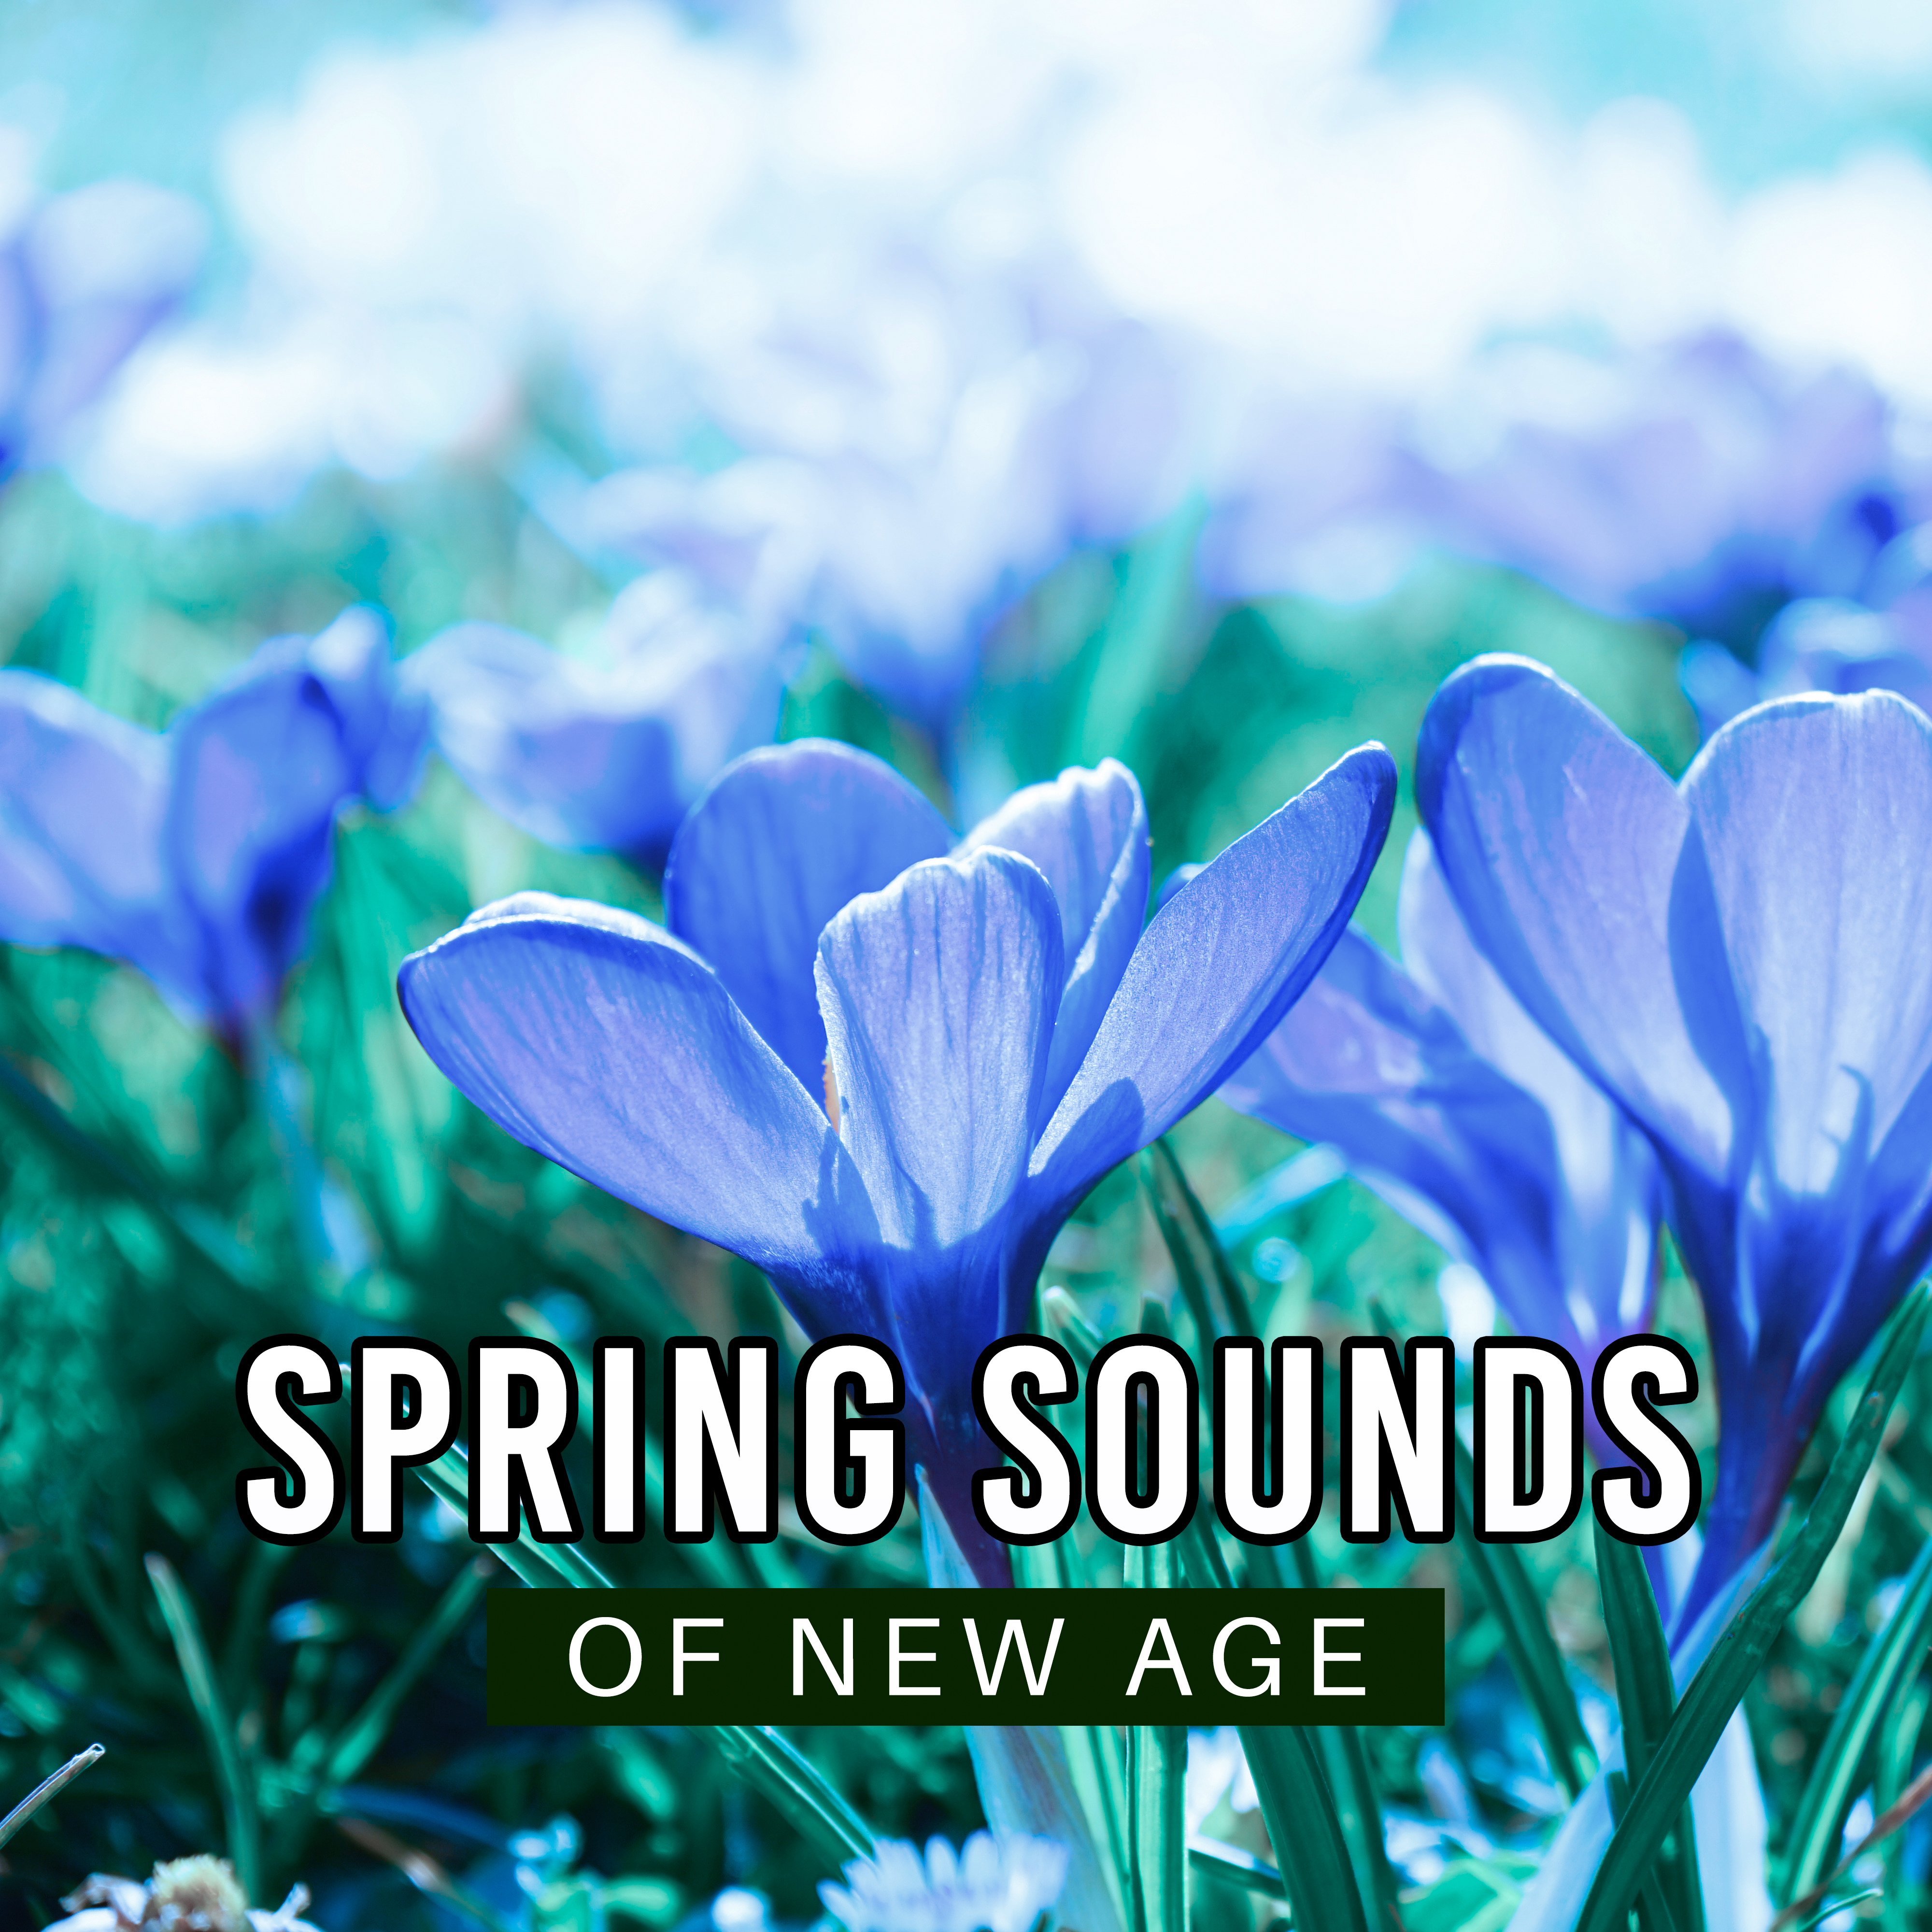 Spring Sounds of New Age  Calming Sounds of Nature, Birds, Water, Deep Relaxing Music, Meditation in the Nature